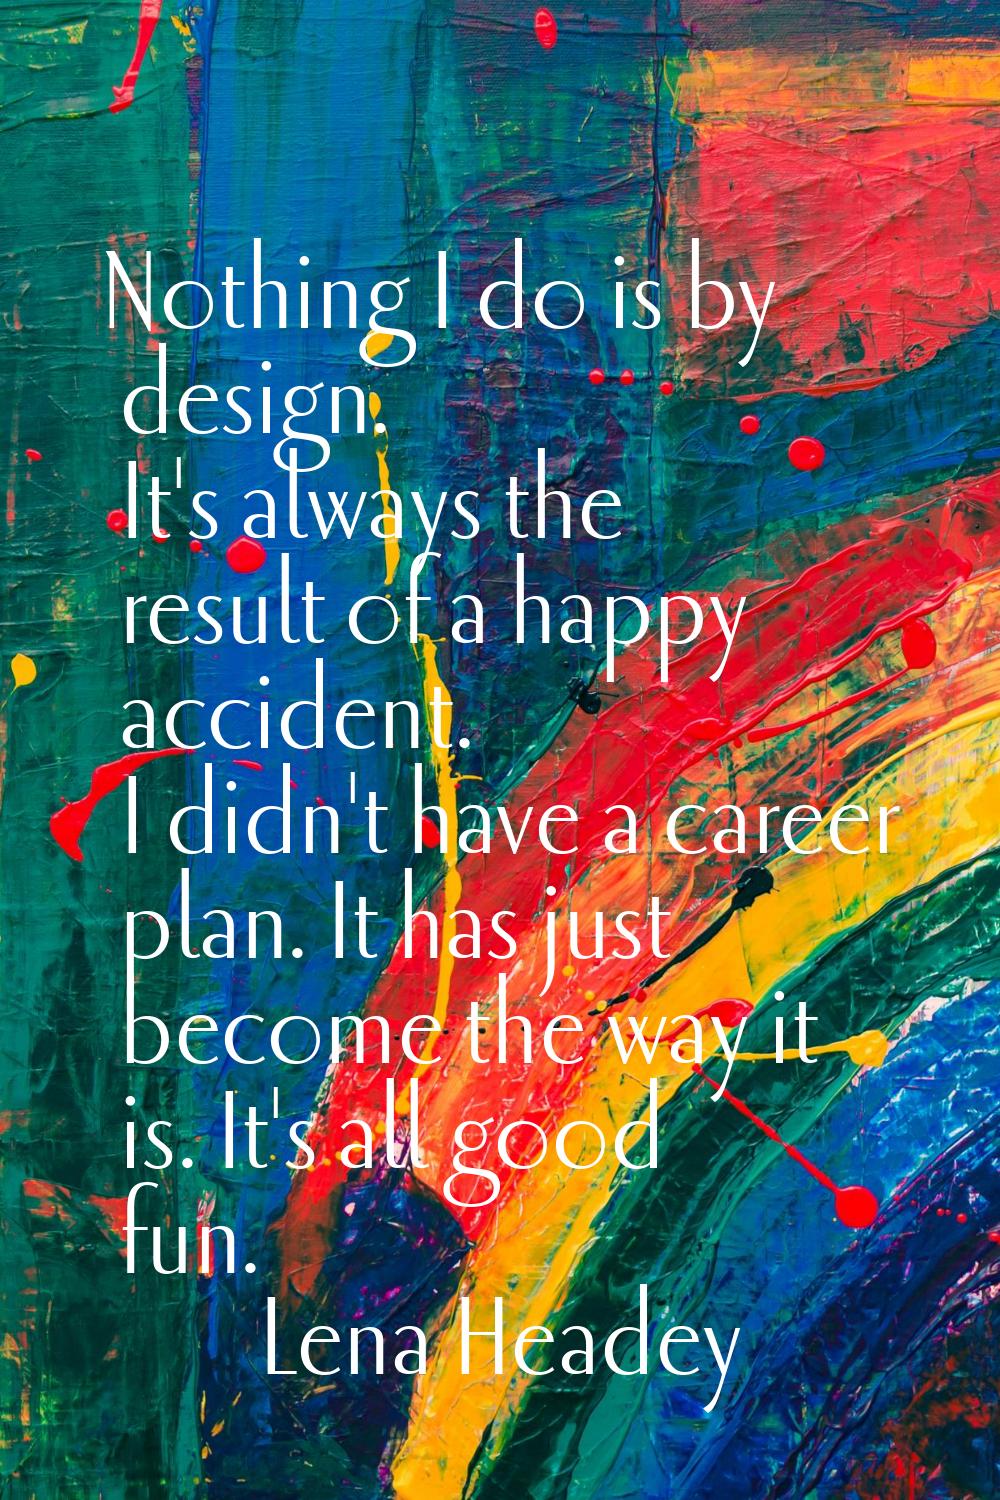 Nothing I do is by design. It's always the result of a happy accident. I didn't have a career plan.